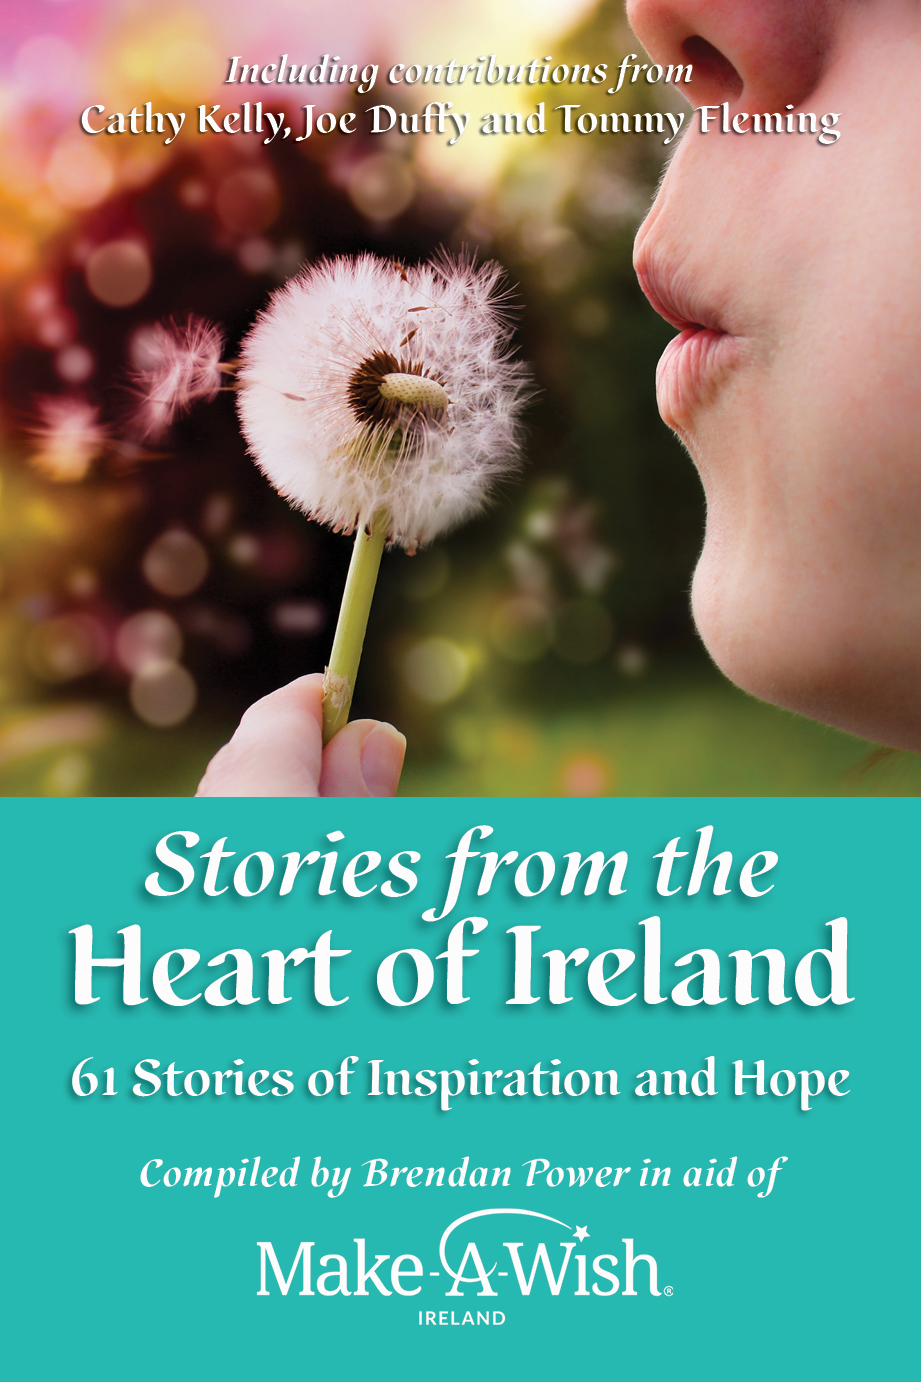 Stories from the Heart of Ireland